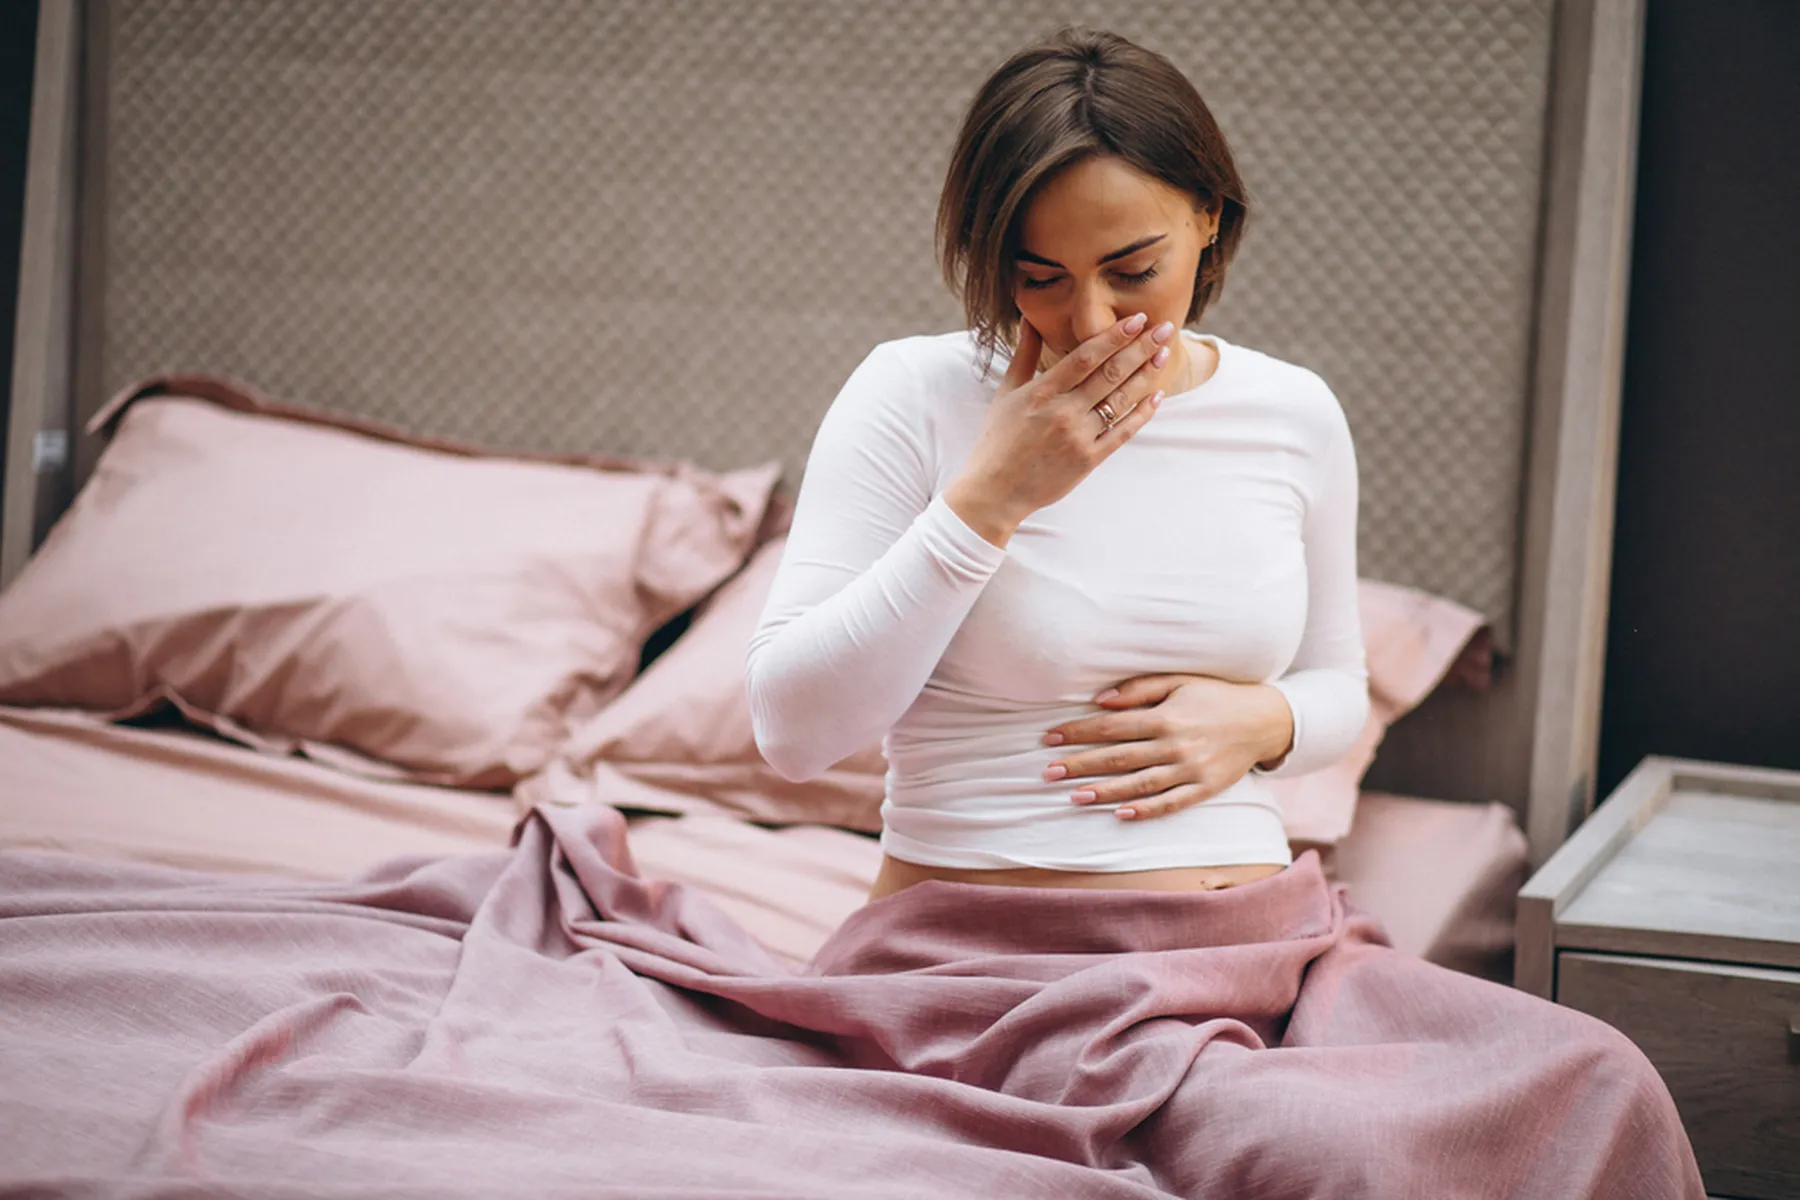 A woman in her first trimester of pregnancy sits on her bed and clutches her stomach with one hand and mouth with the other.